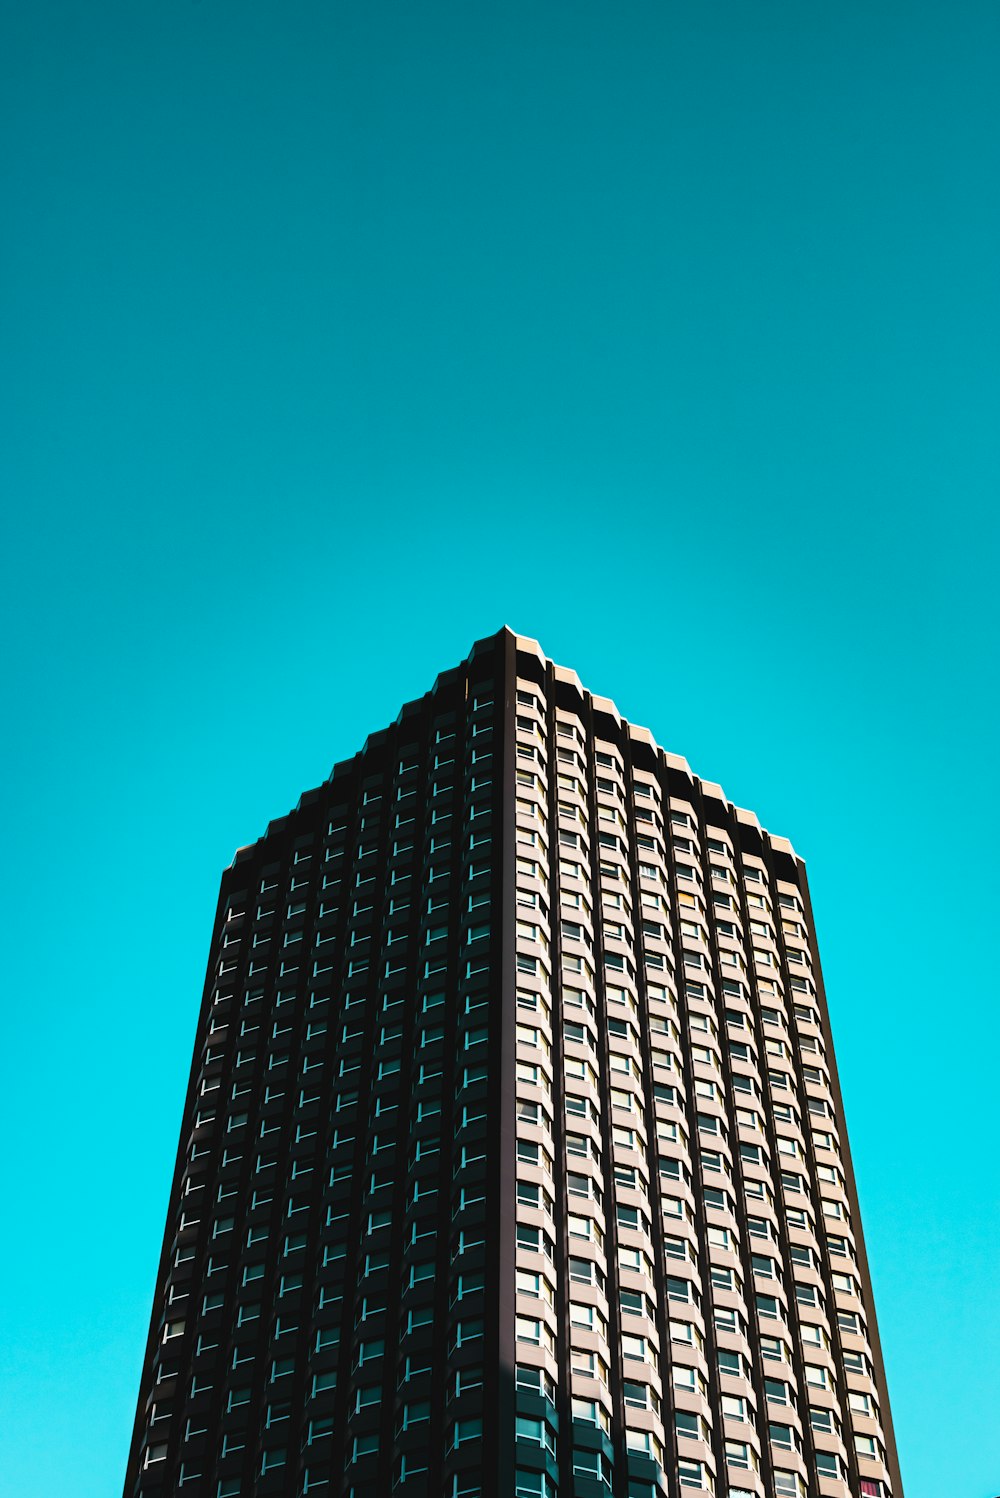 black and gray concrete building under blue sky during daytime